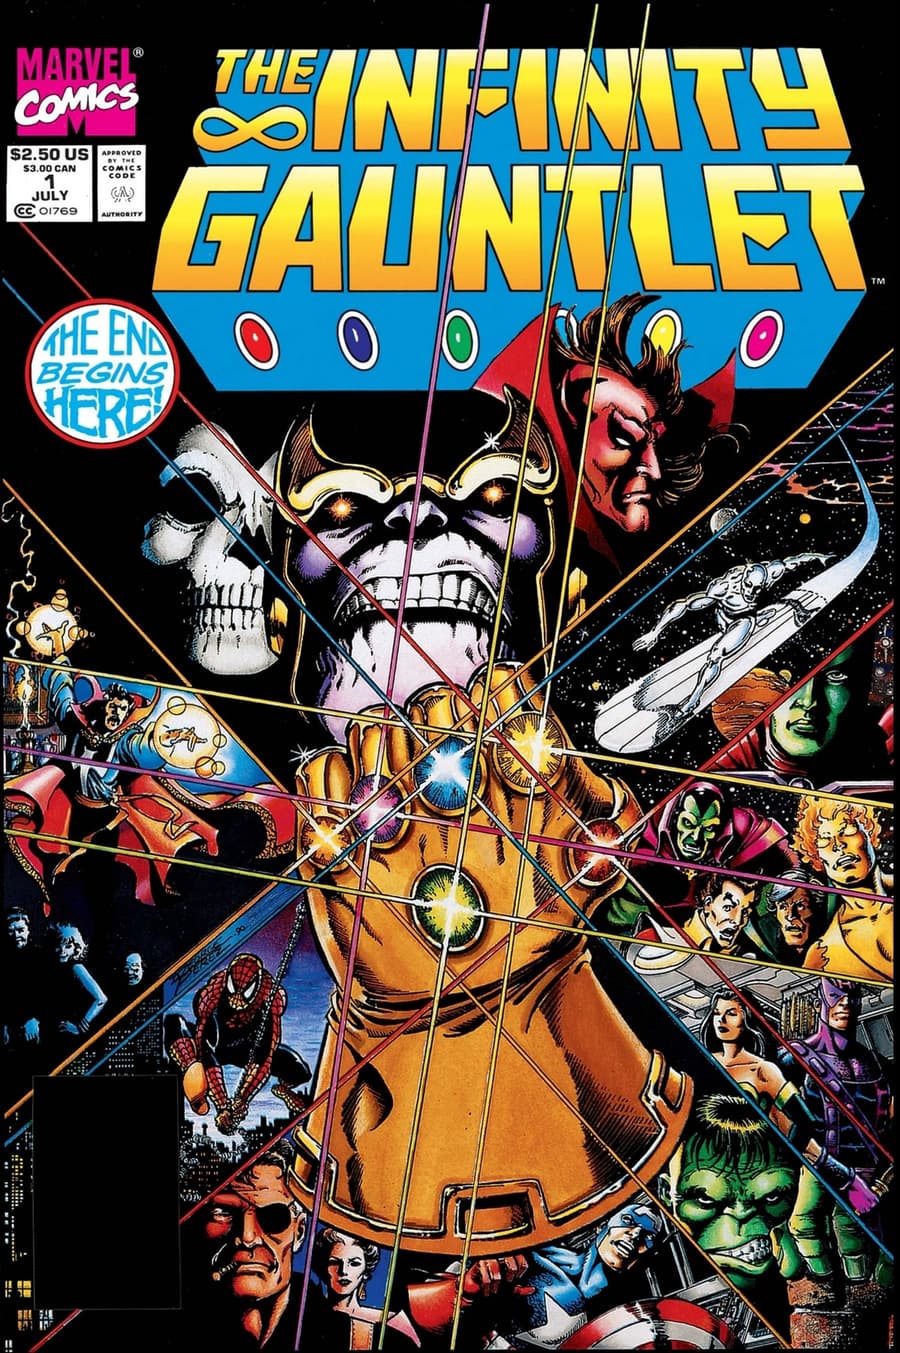 INFINITY GAUNTLET (1991) #1 cover by George Pérez